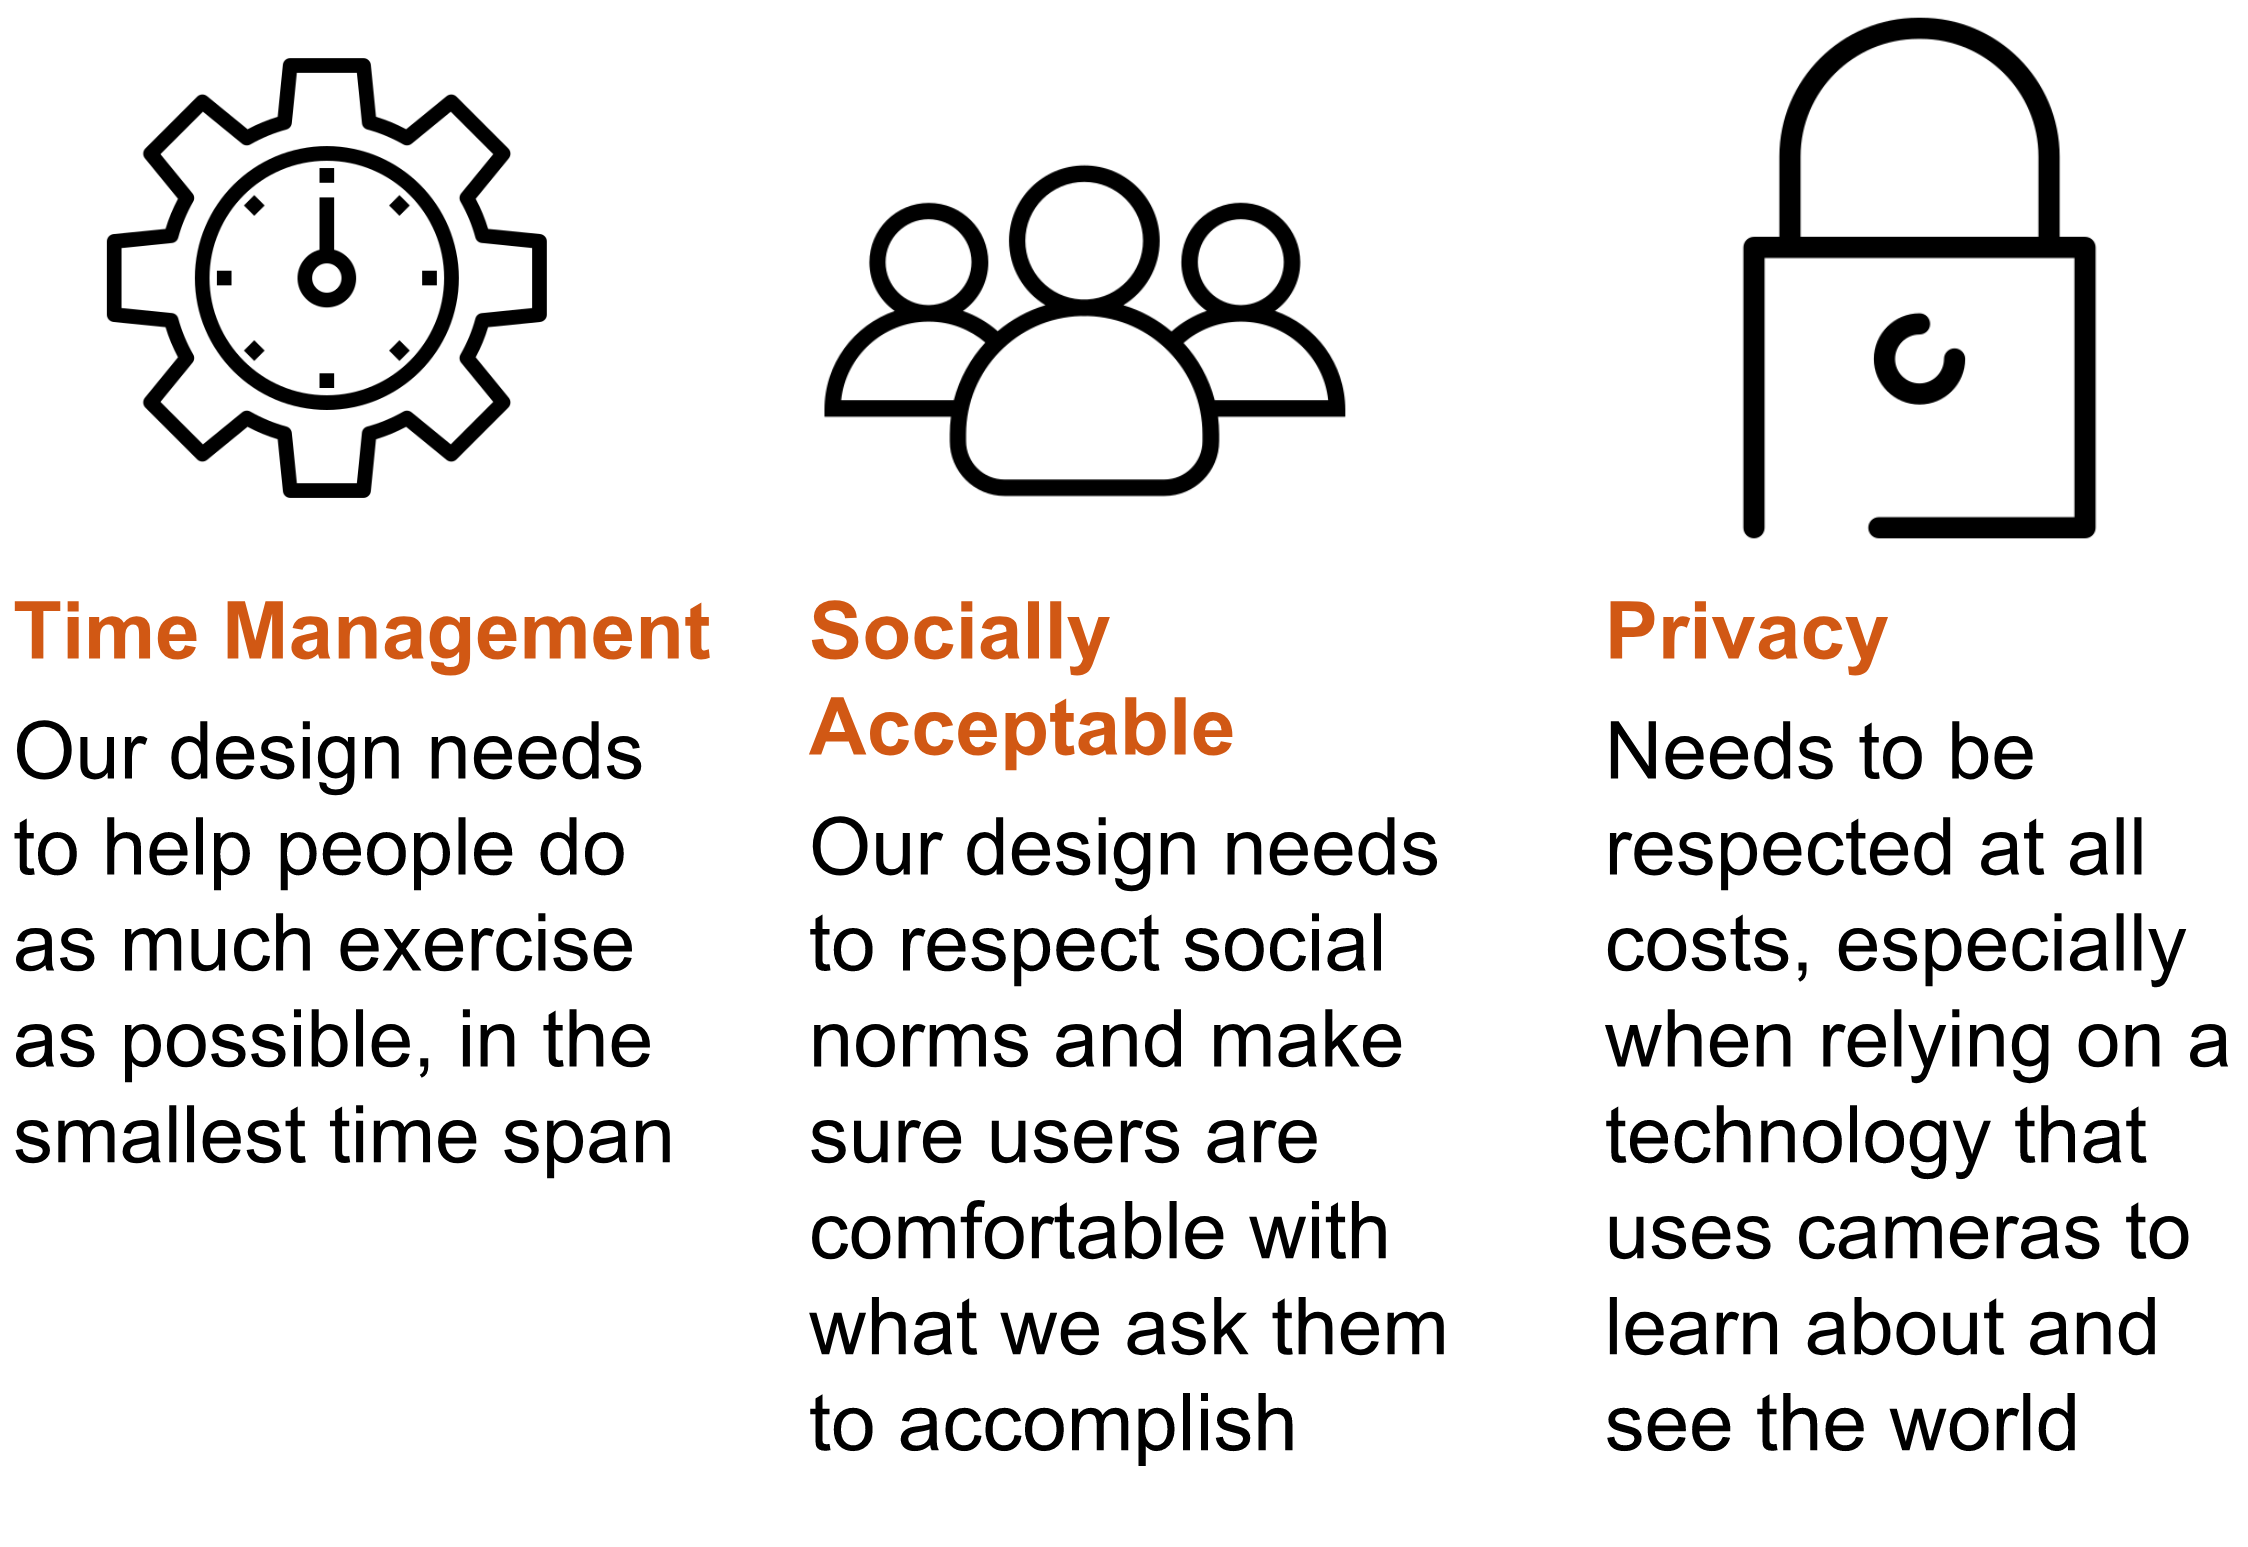 3 main formative study insights:  Time Management, Social Acceptance, and Privacy